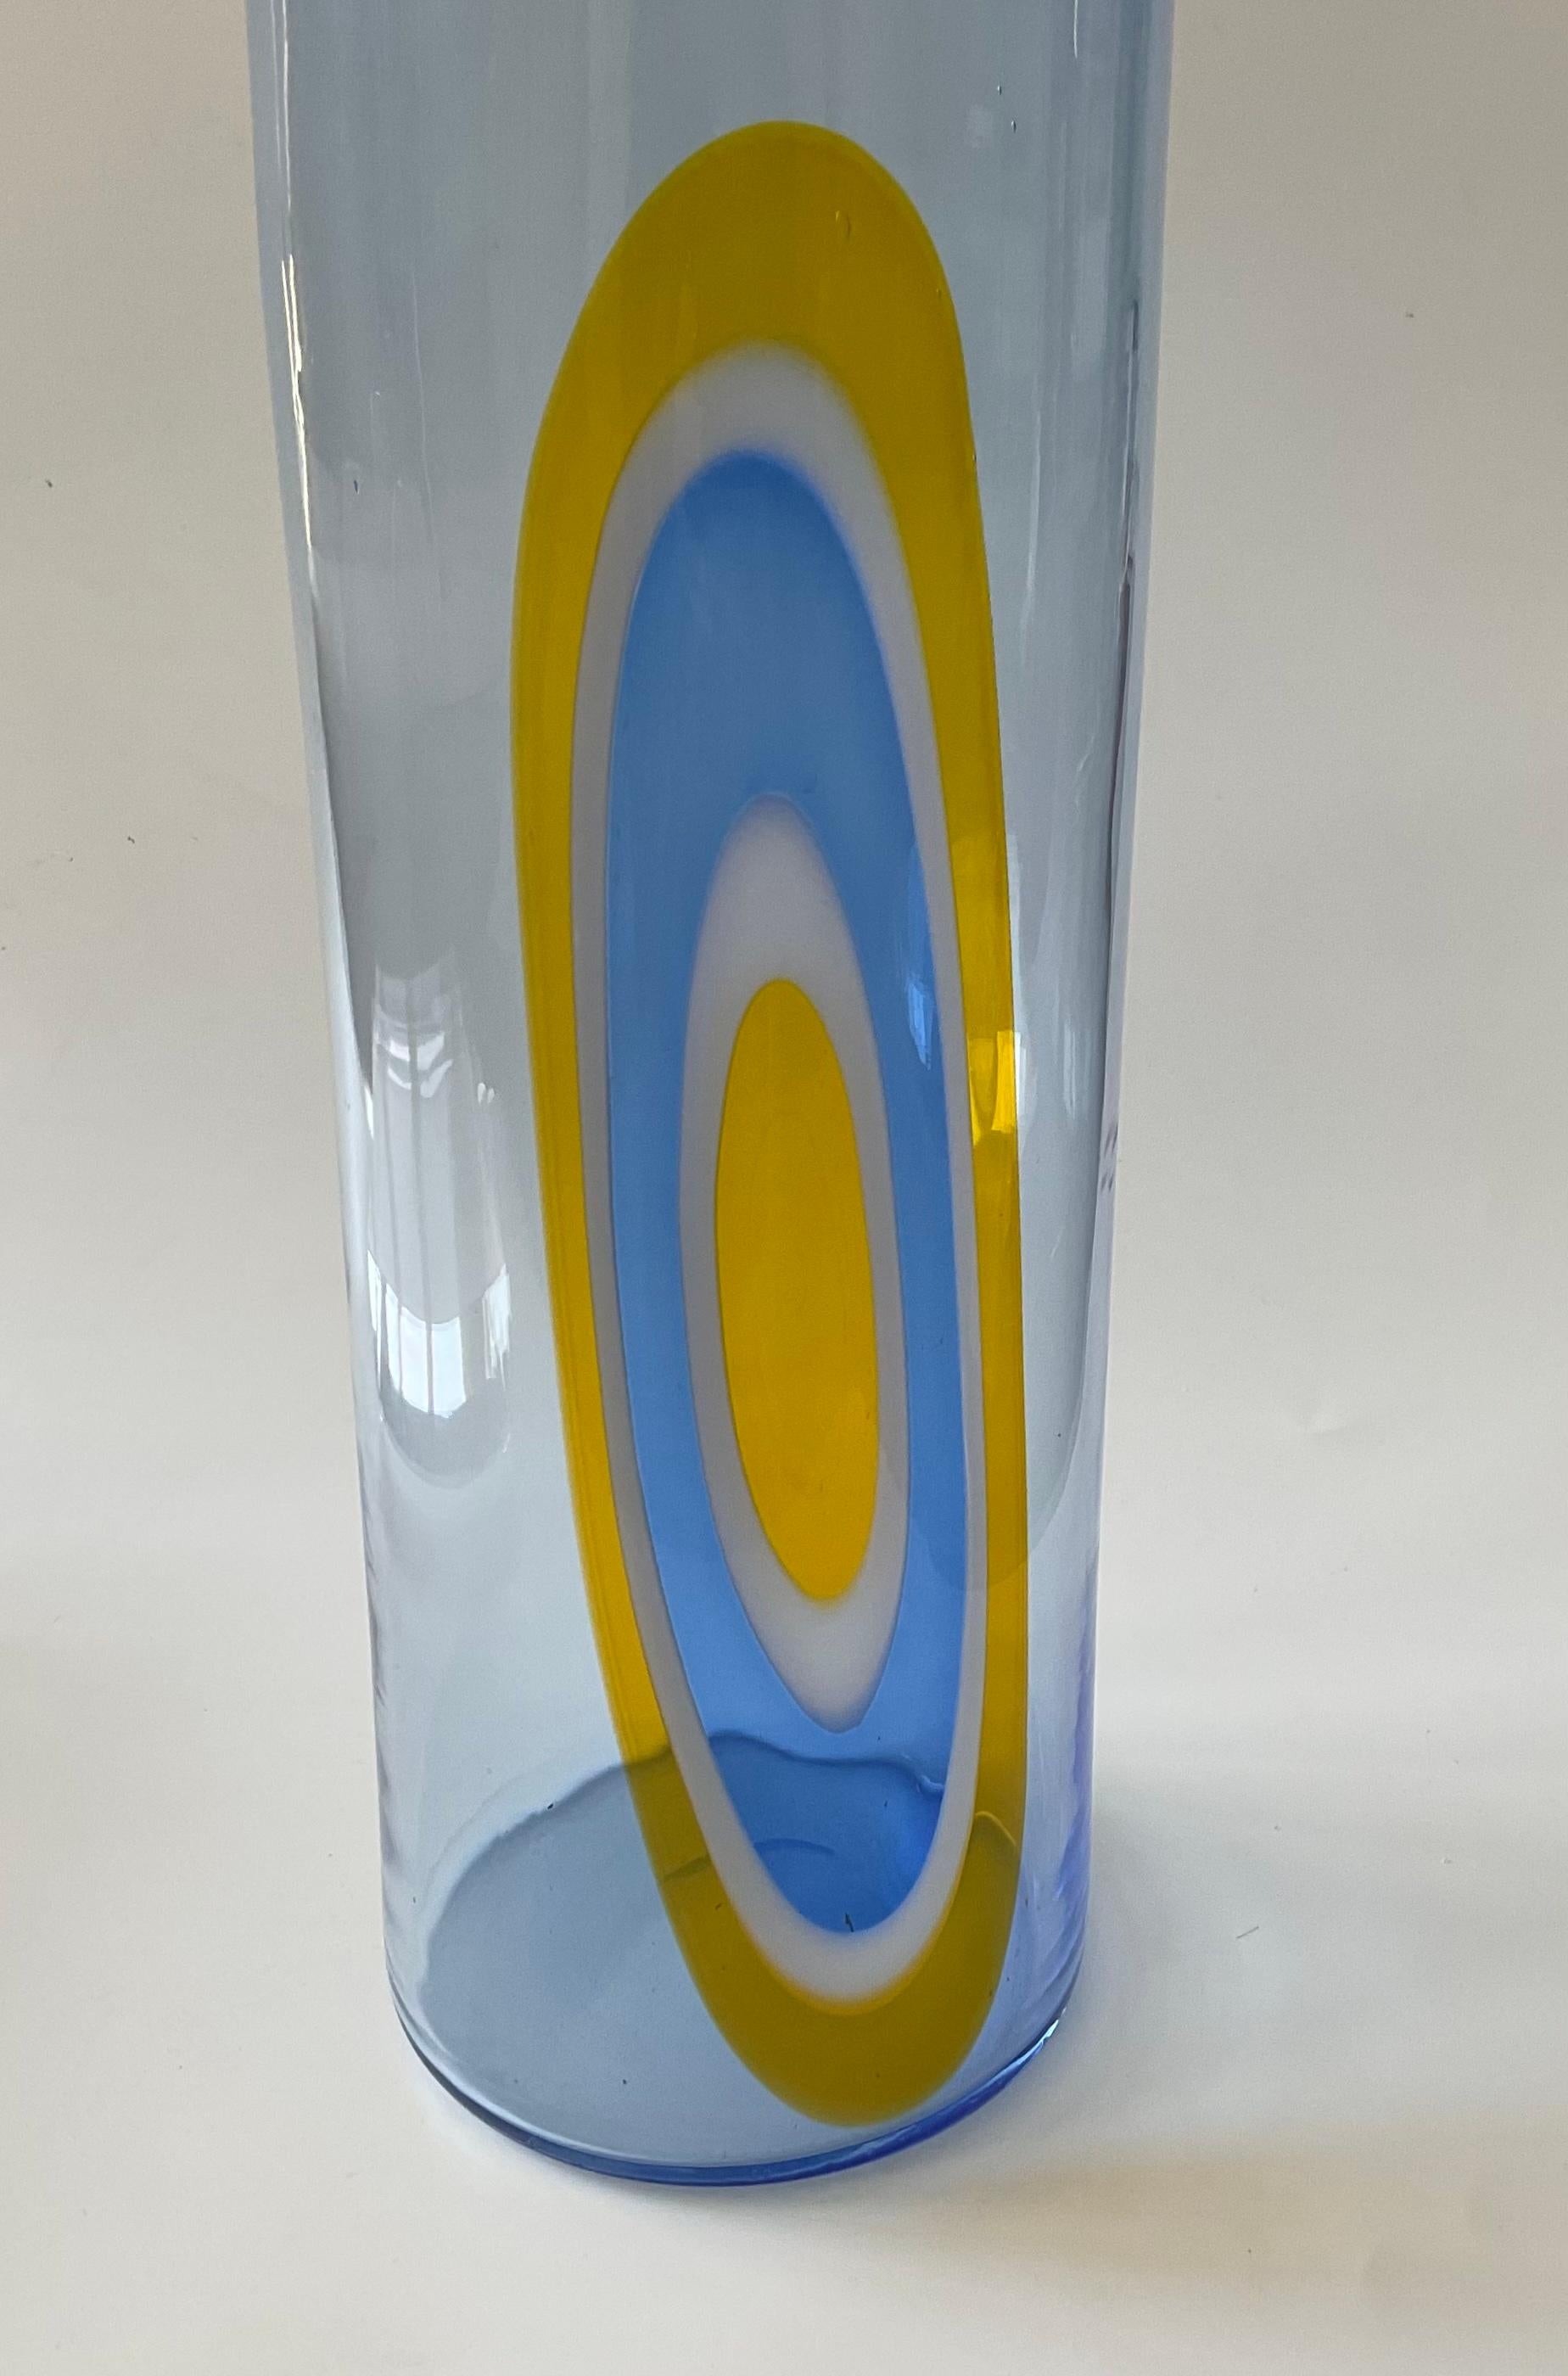 Mid-Century Modern Gianmaria Potenza Large Murano Glass Complicated Murrine Vase in Vibrant Blue For Sale